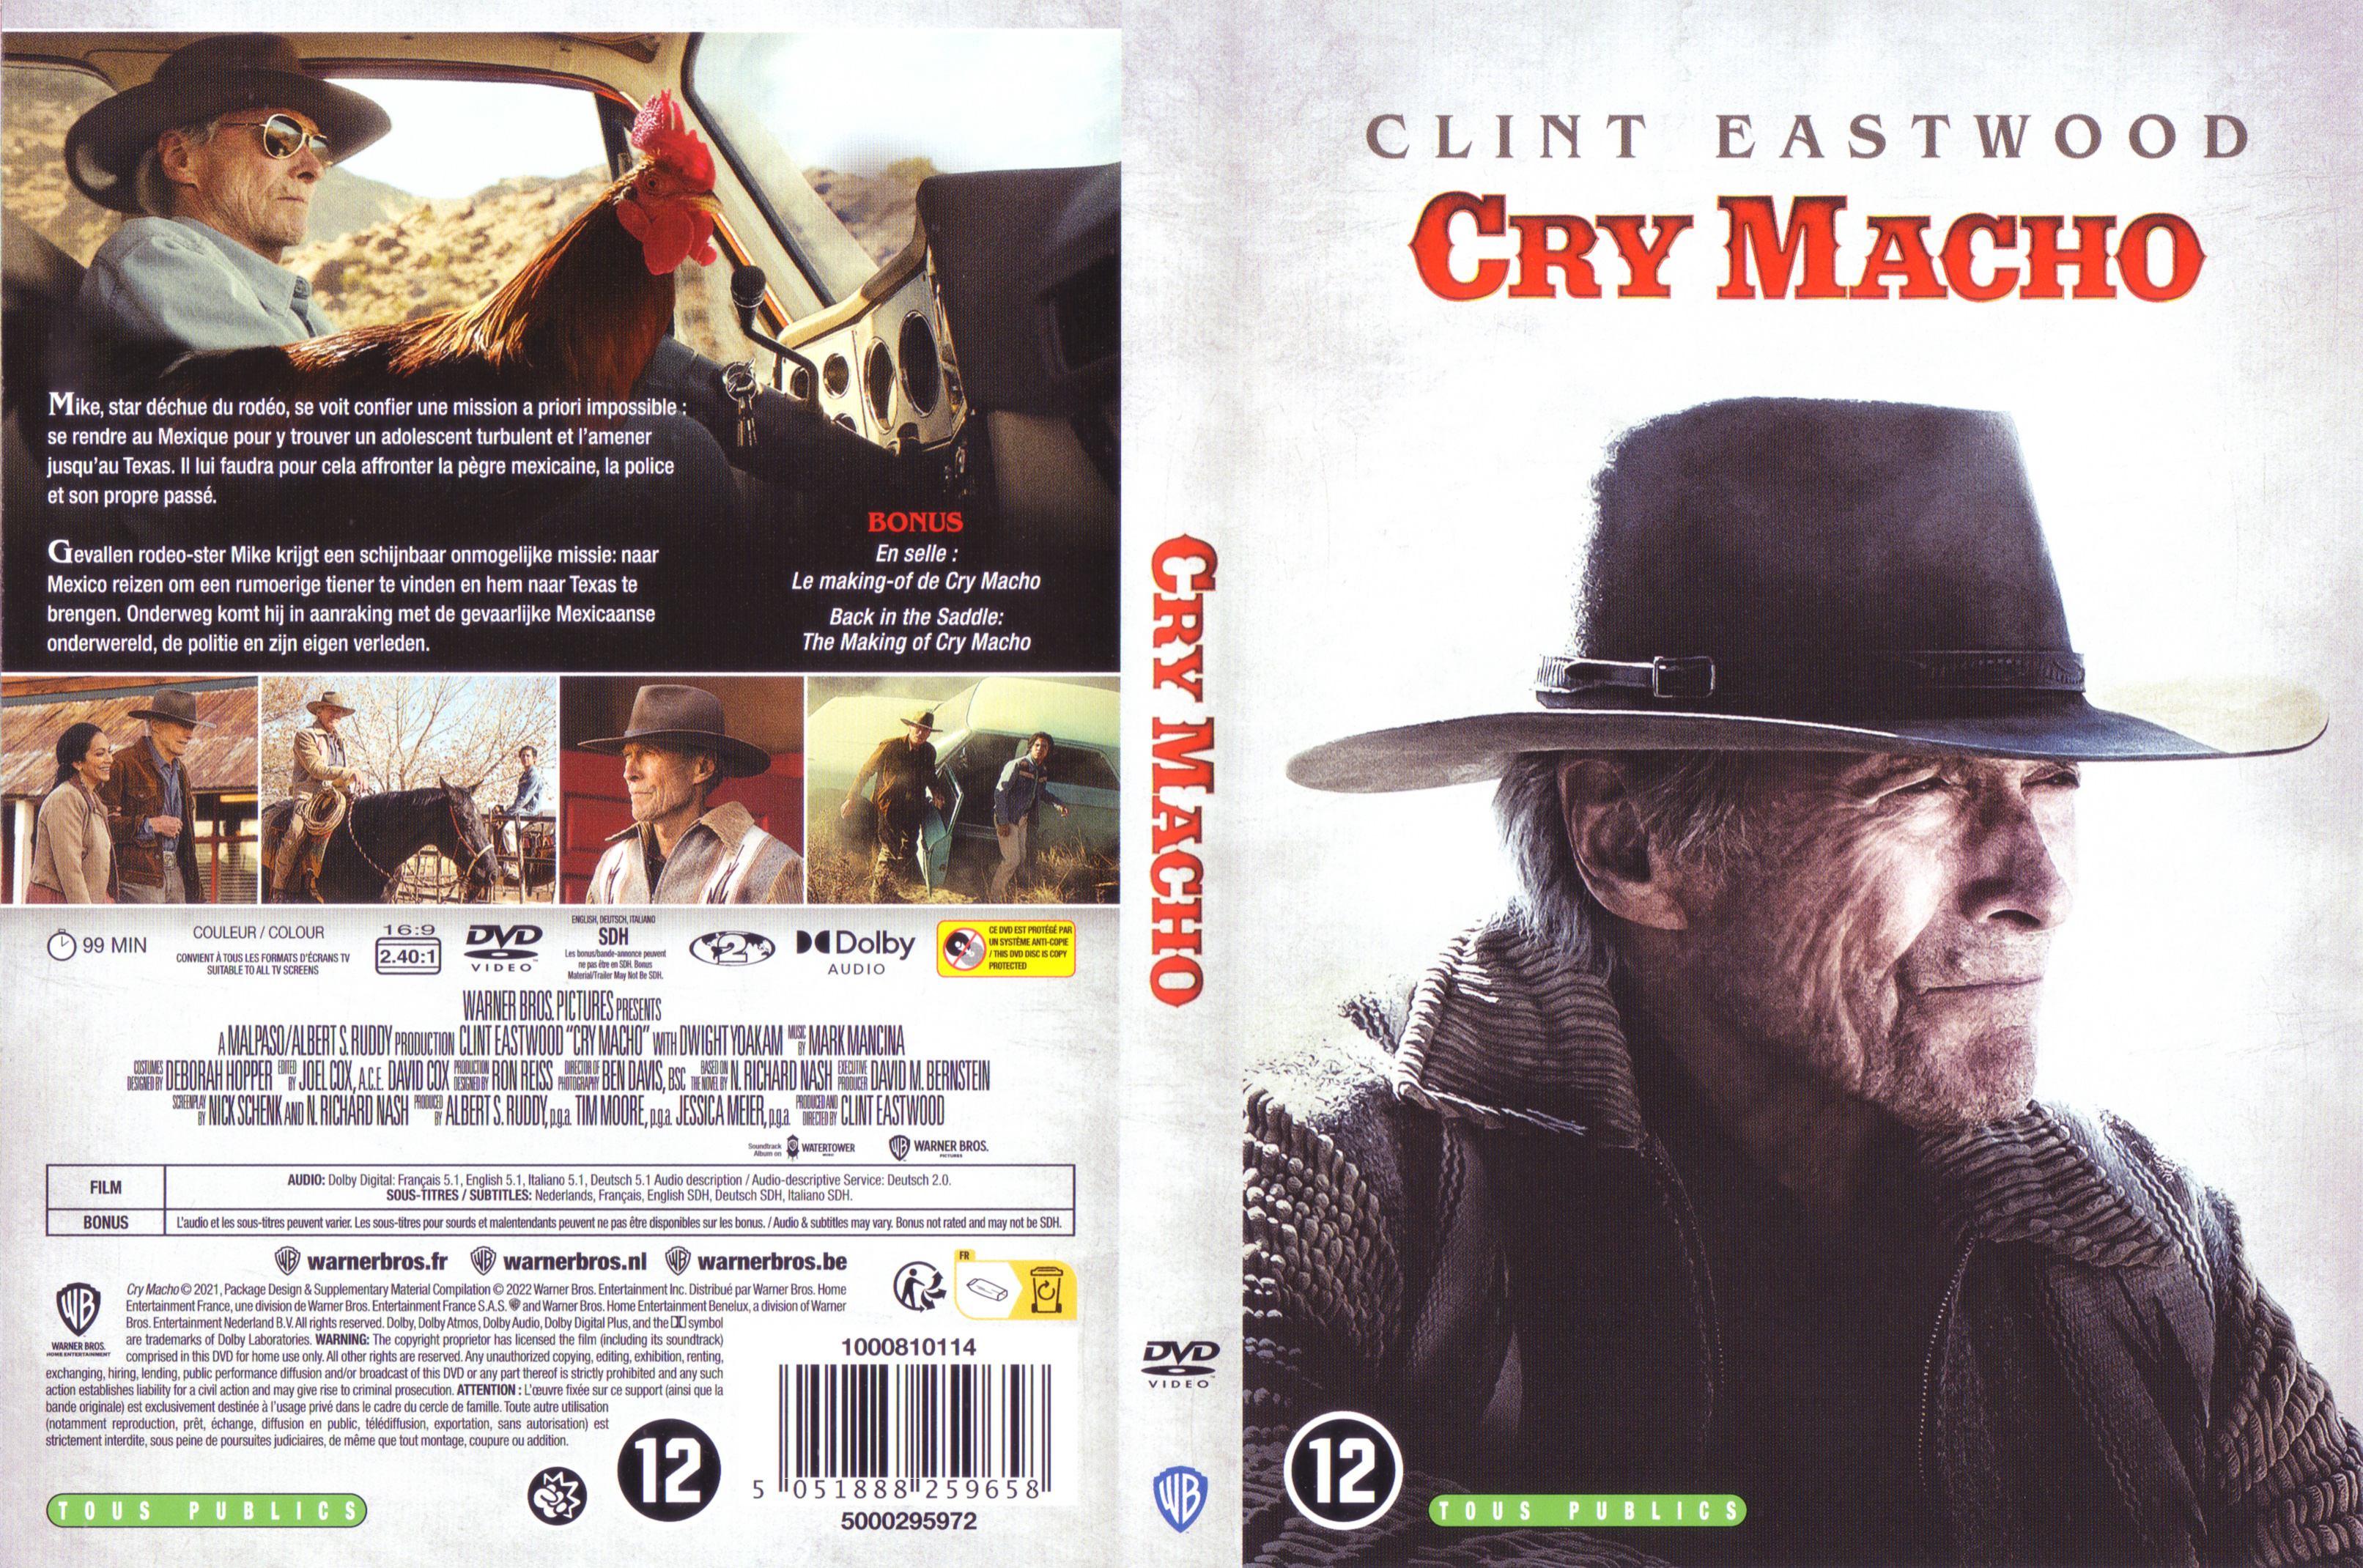 Jaquette DVD Cry macho